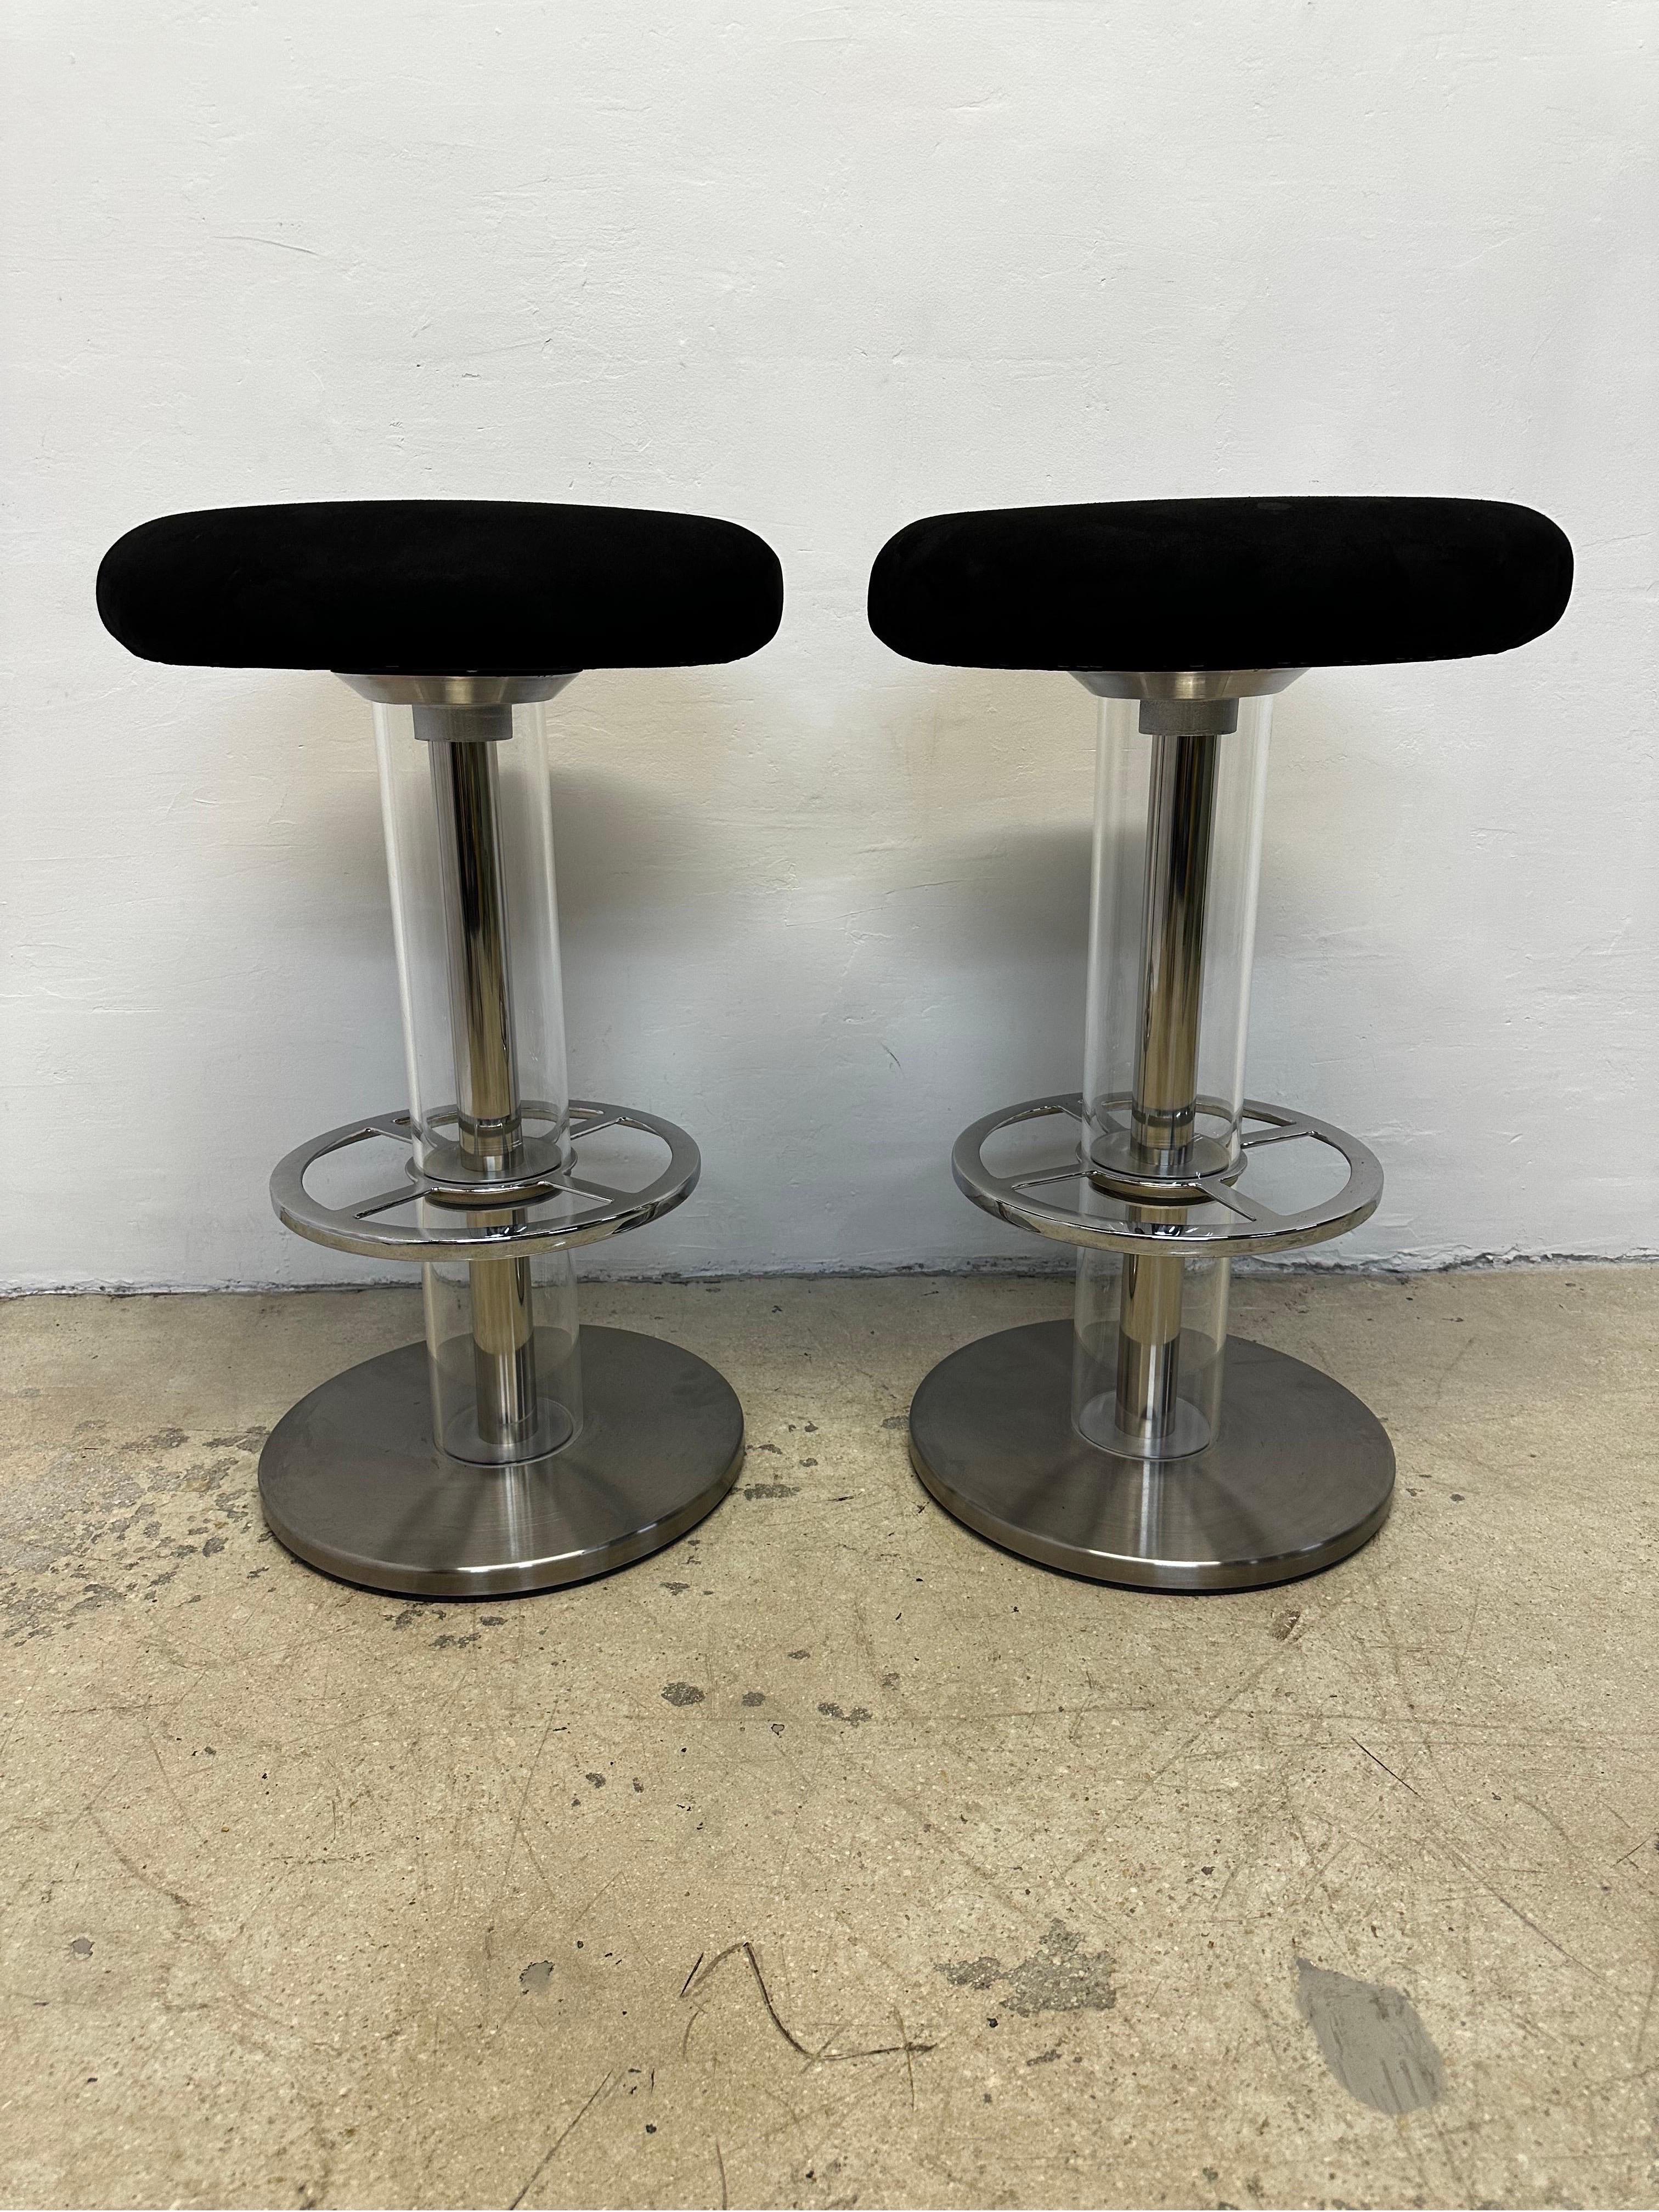 American Design for Leisure Steel and Black Ultra Suede Swivel Bar Stools - a Pair For Sale